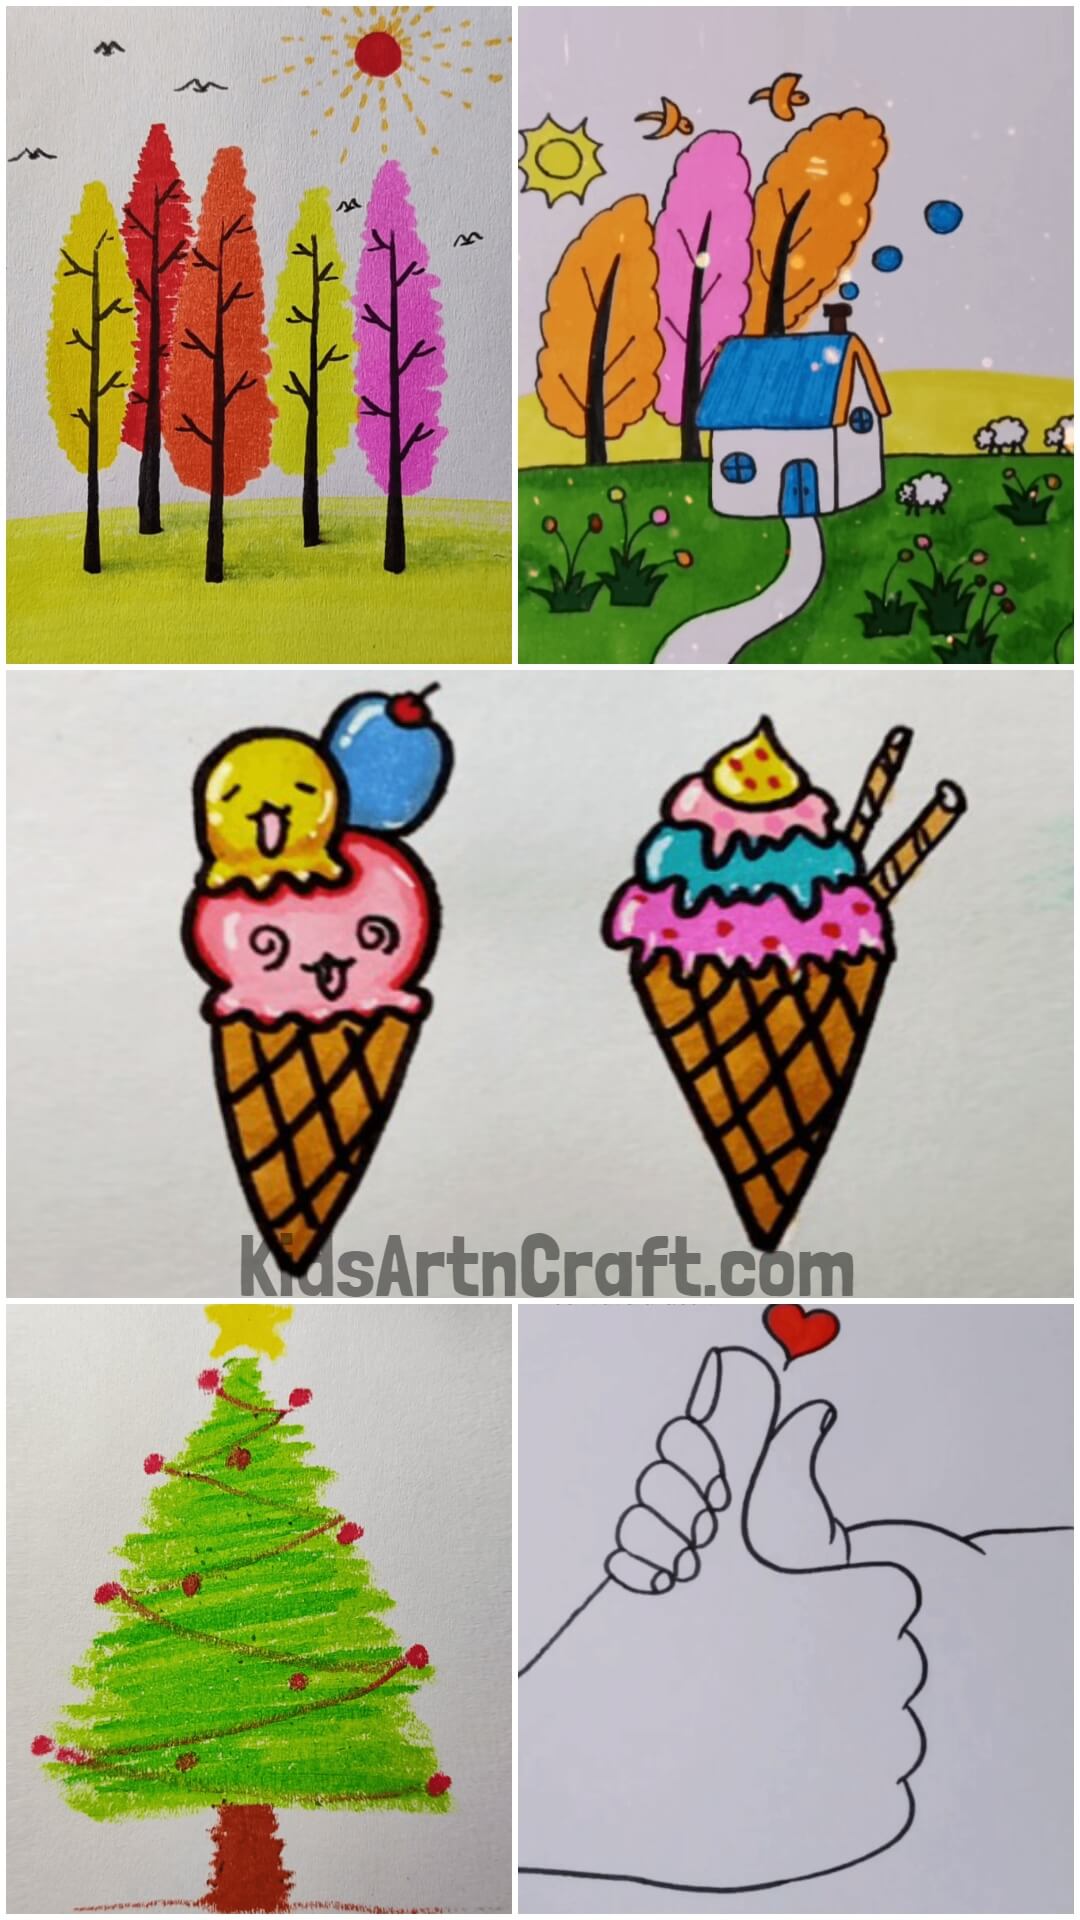 Colorful & Fresh Drawings for Kids